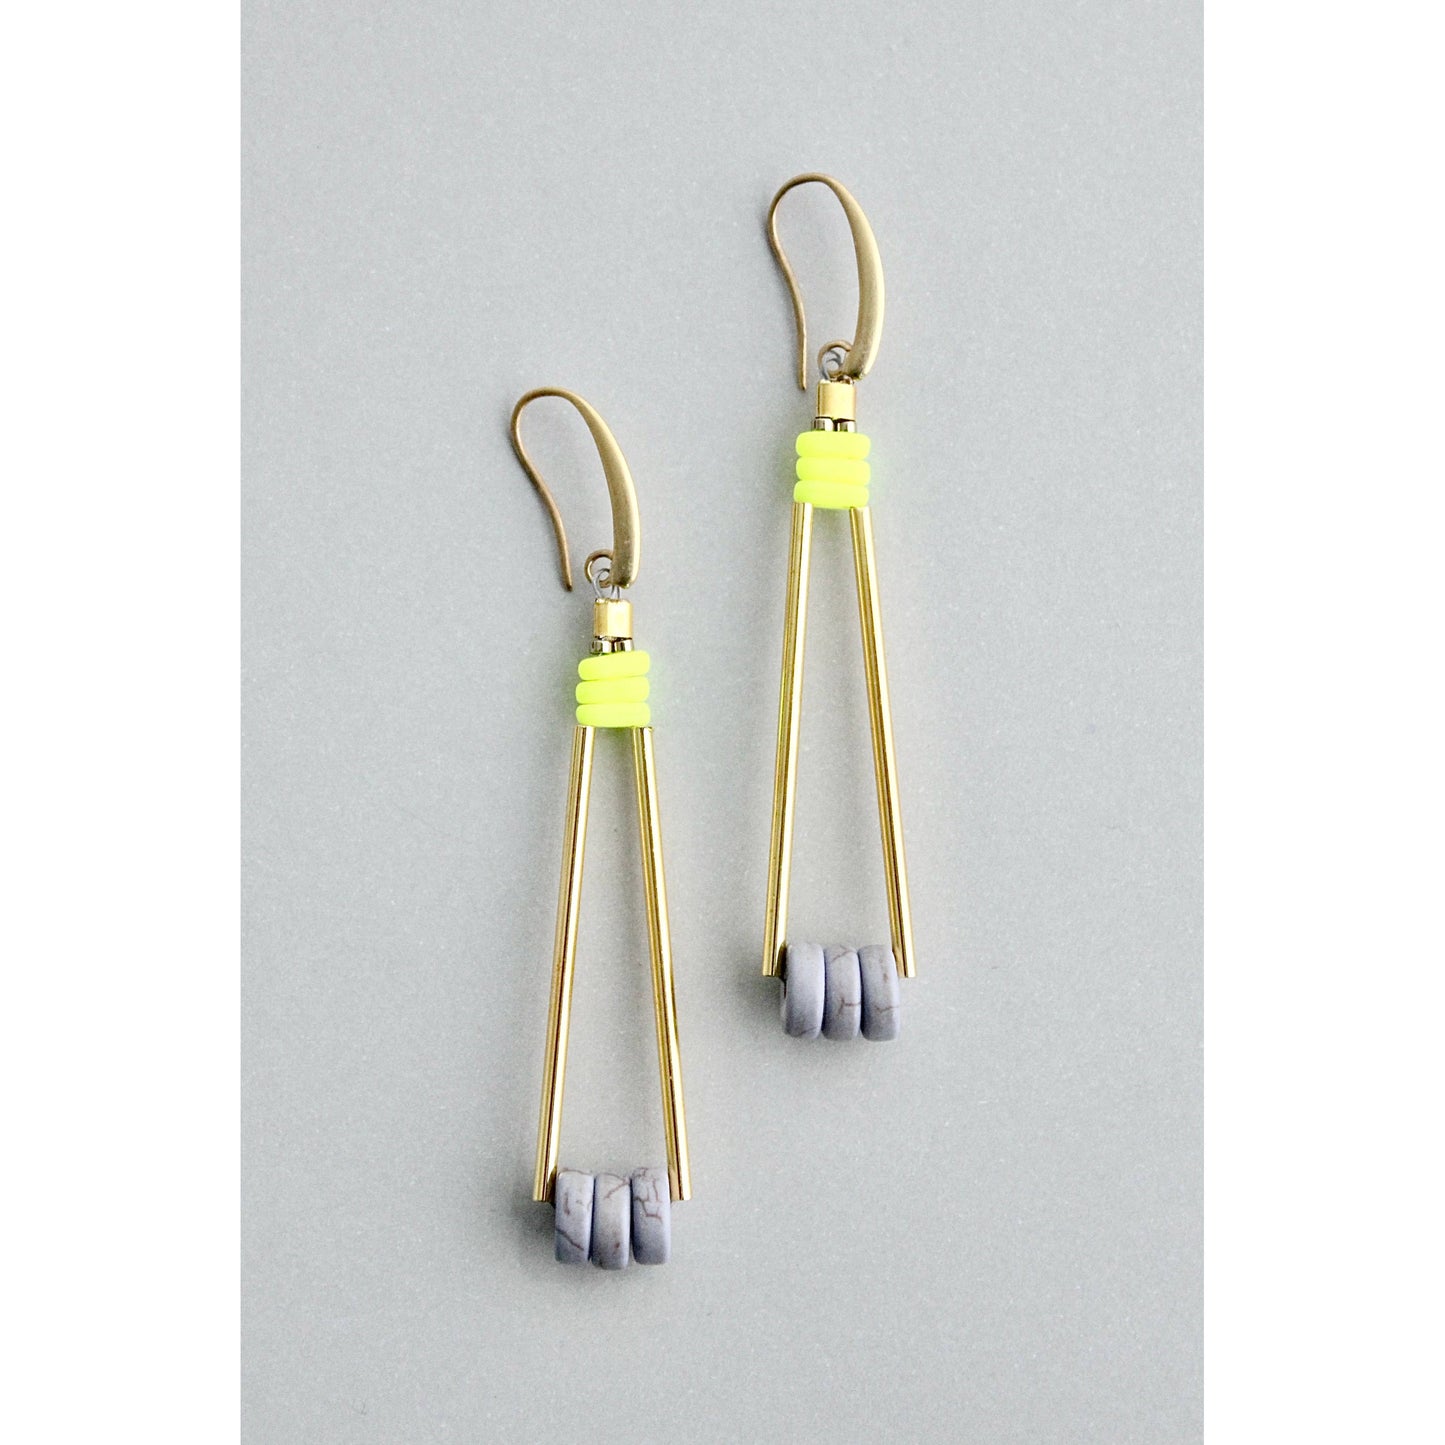 GNDE83 neon yellow and gray earrings